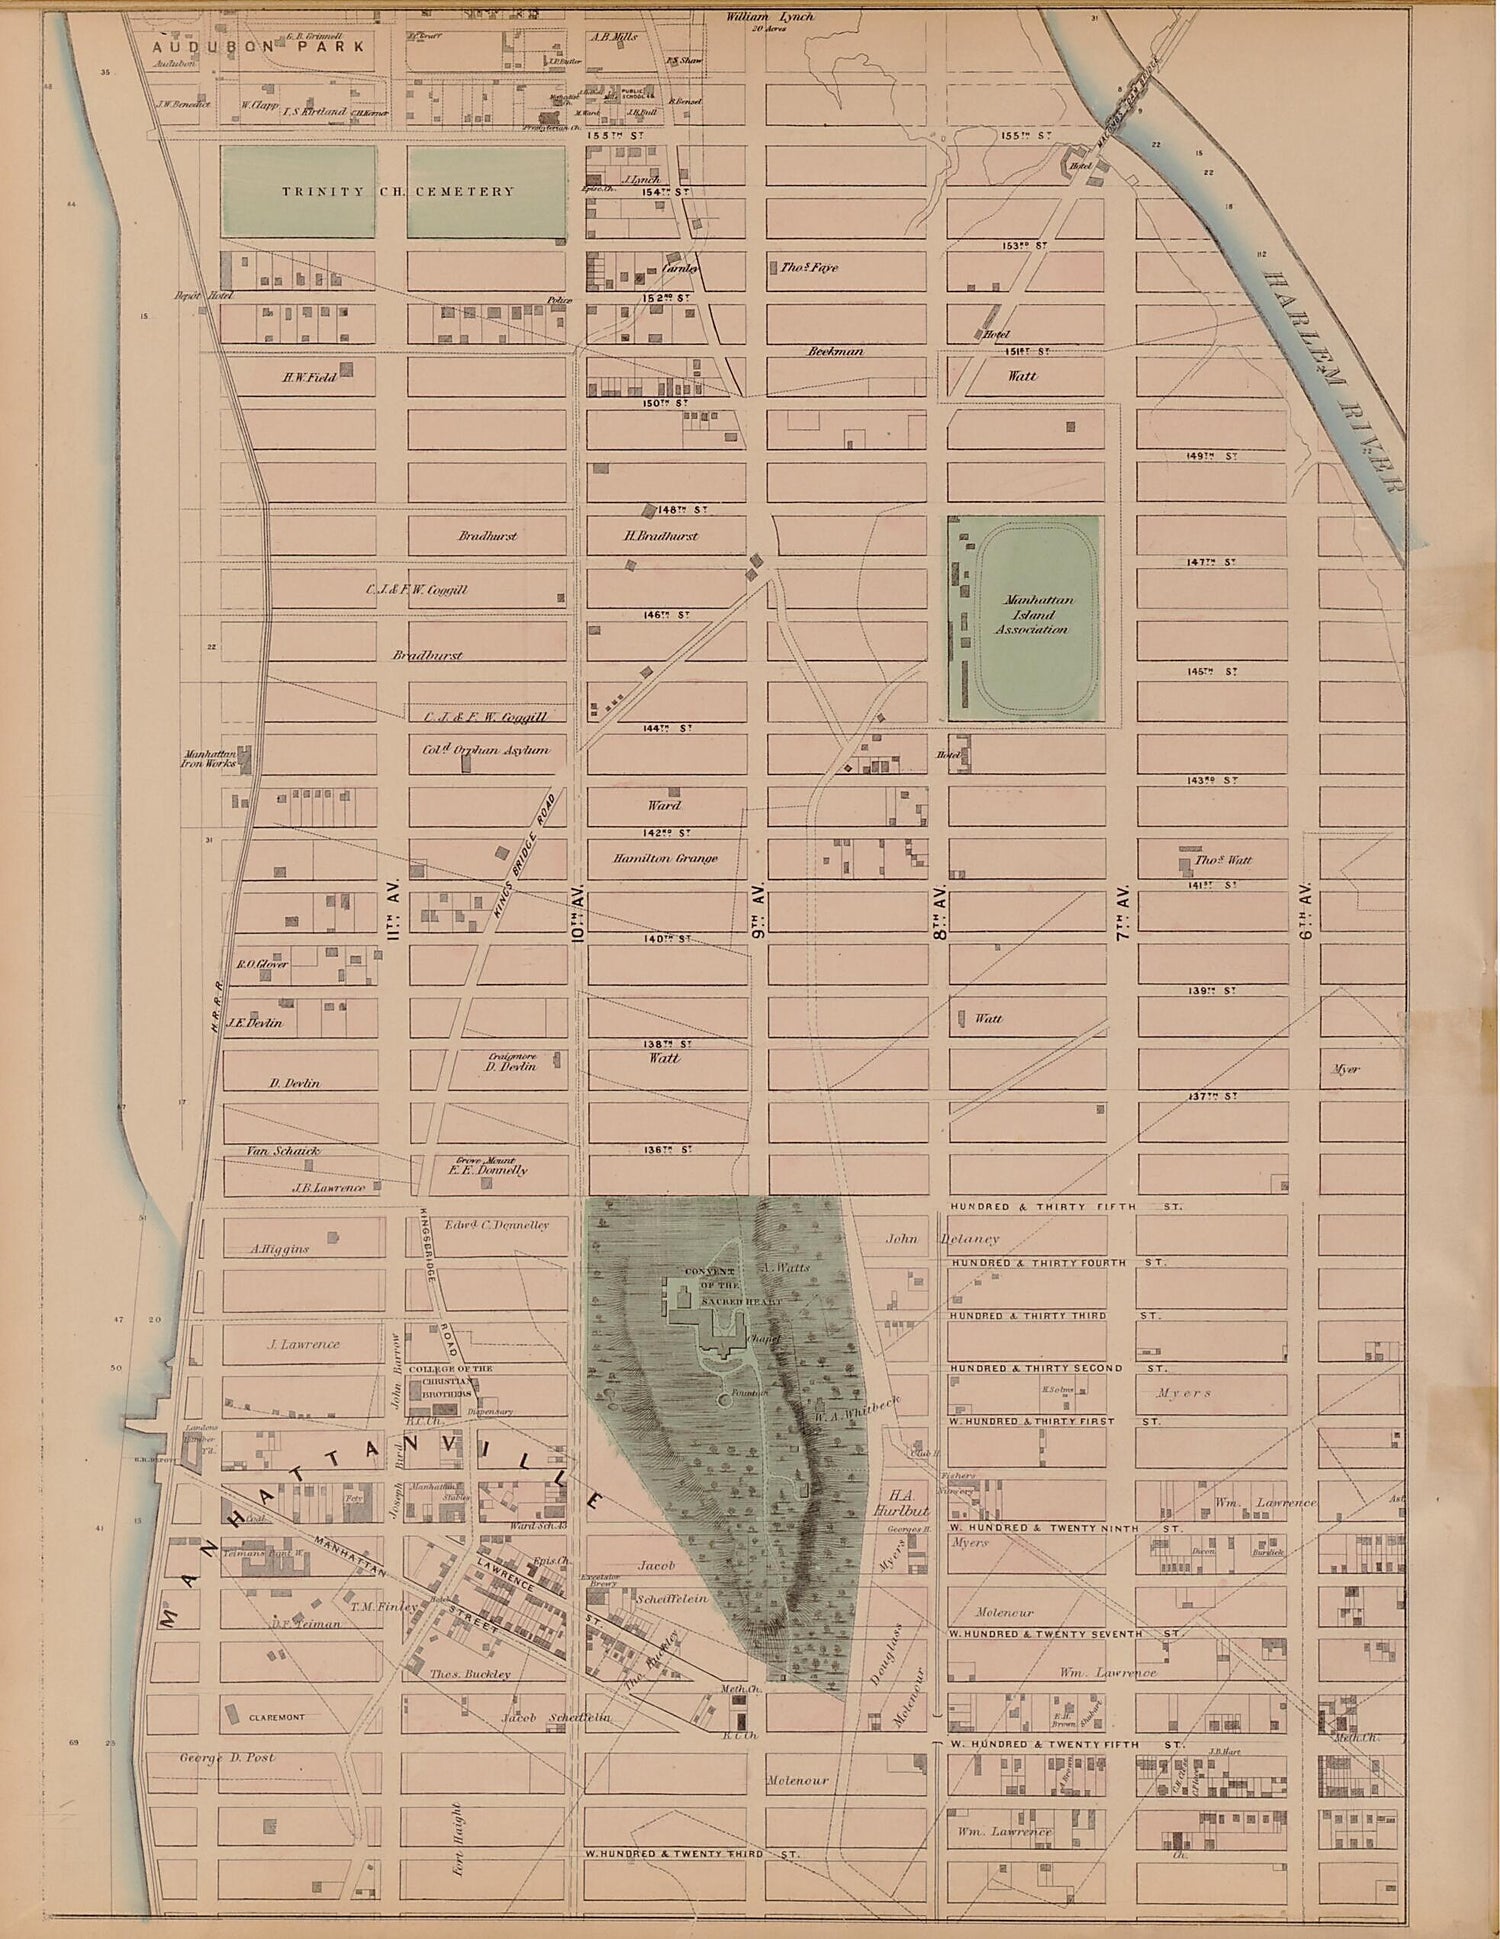 This old map of Plate 16 from Plan of New York City from the Battery to Spuyten Duyvil Creek from 1866 was created by John F. Harrison in 1866